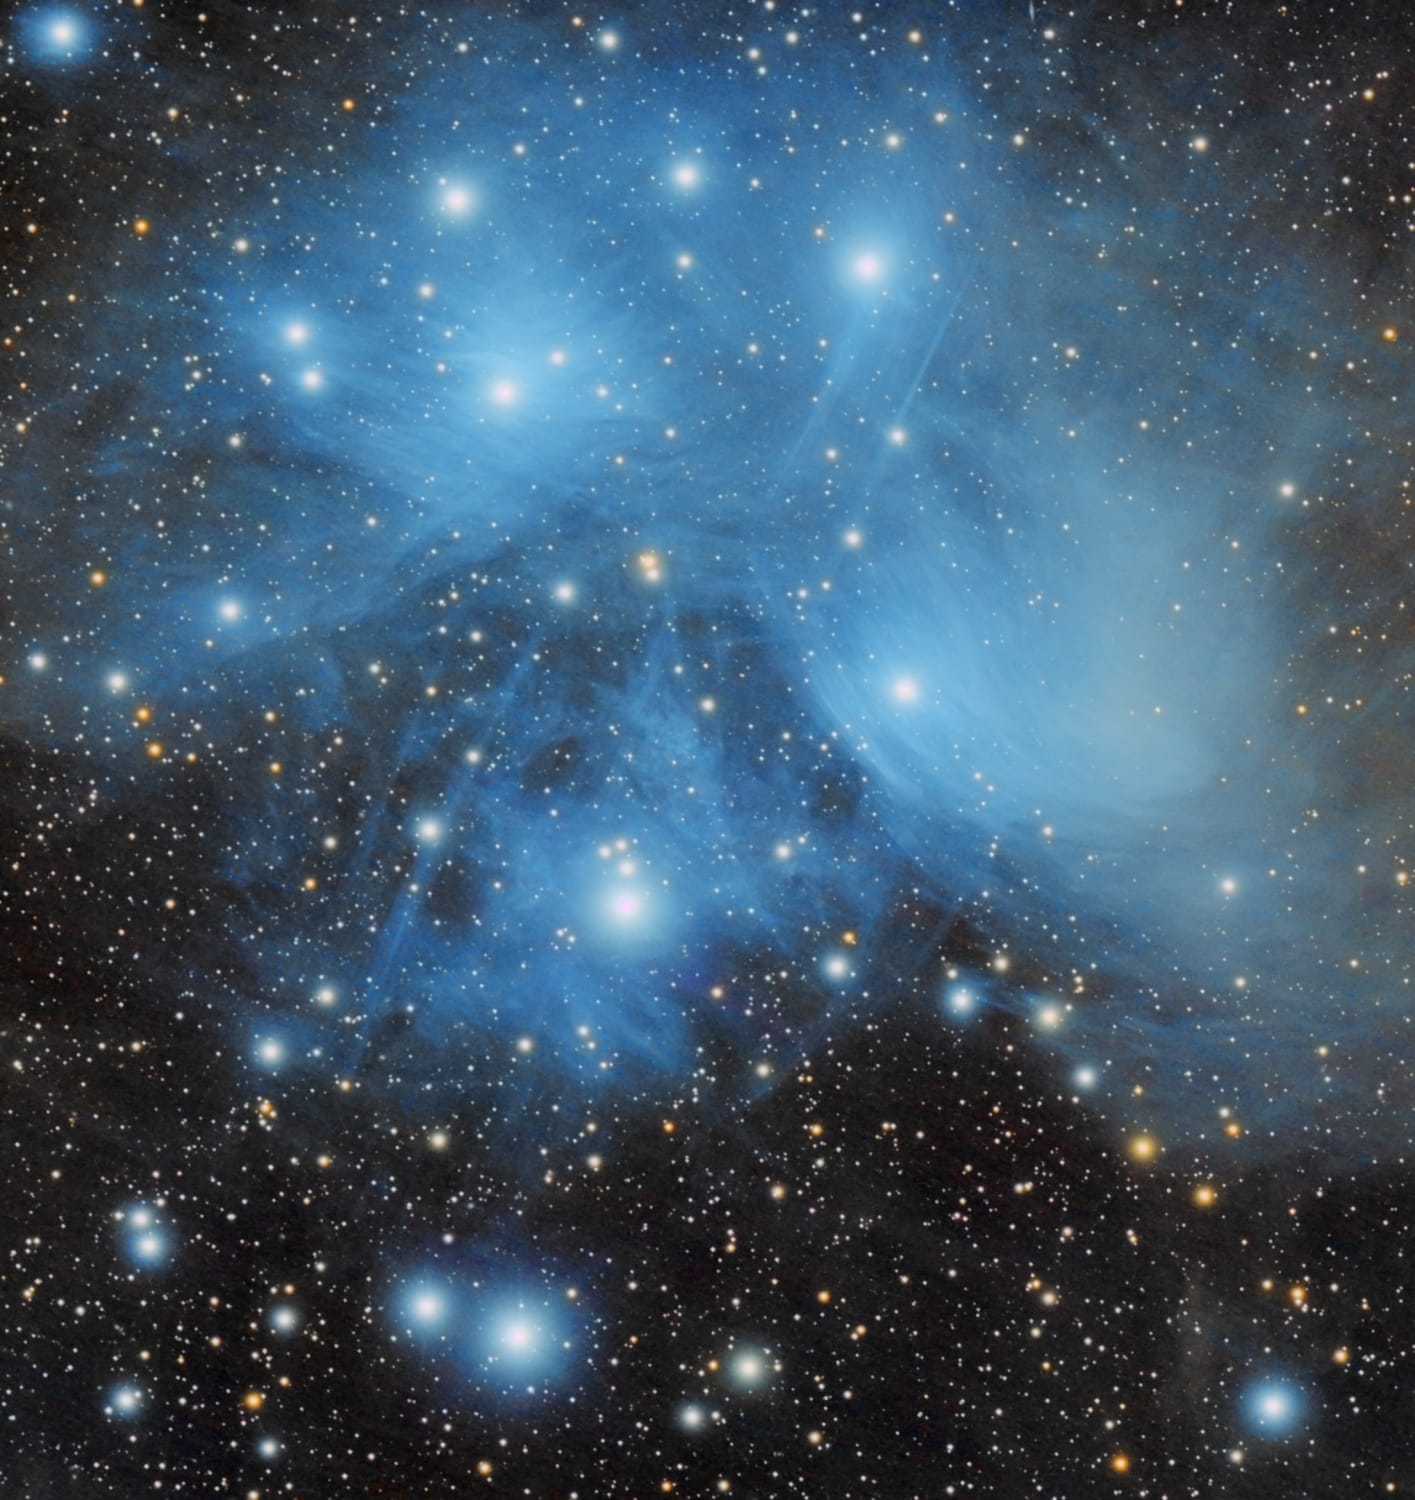 The Pleiades Open star cluster - Messier 45